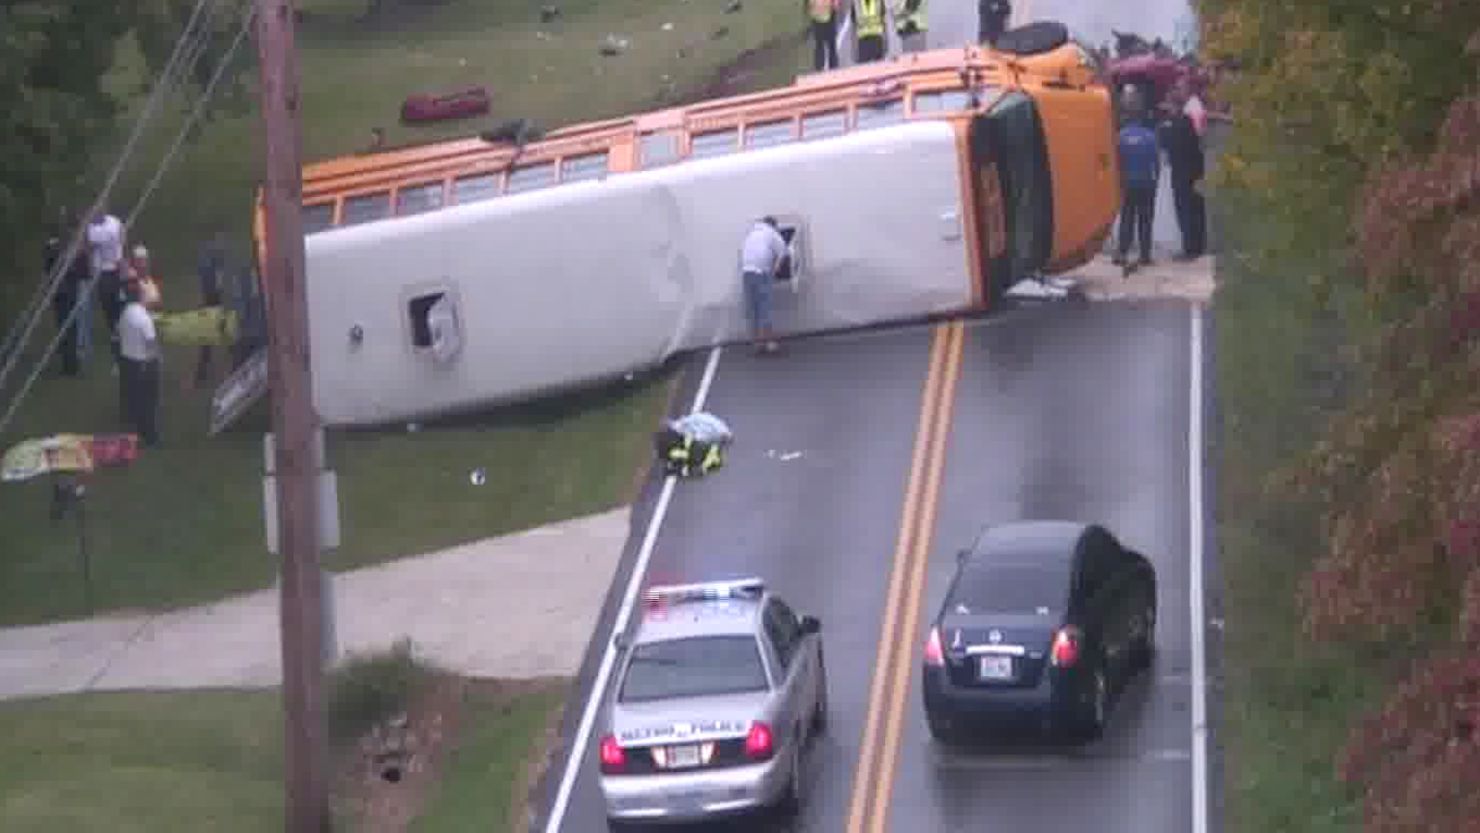 Forty seven students were taken to the hospital after this school bus rolled on its side. 